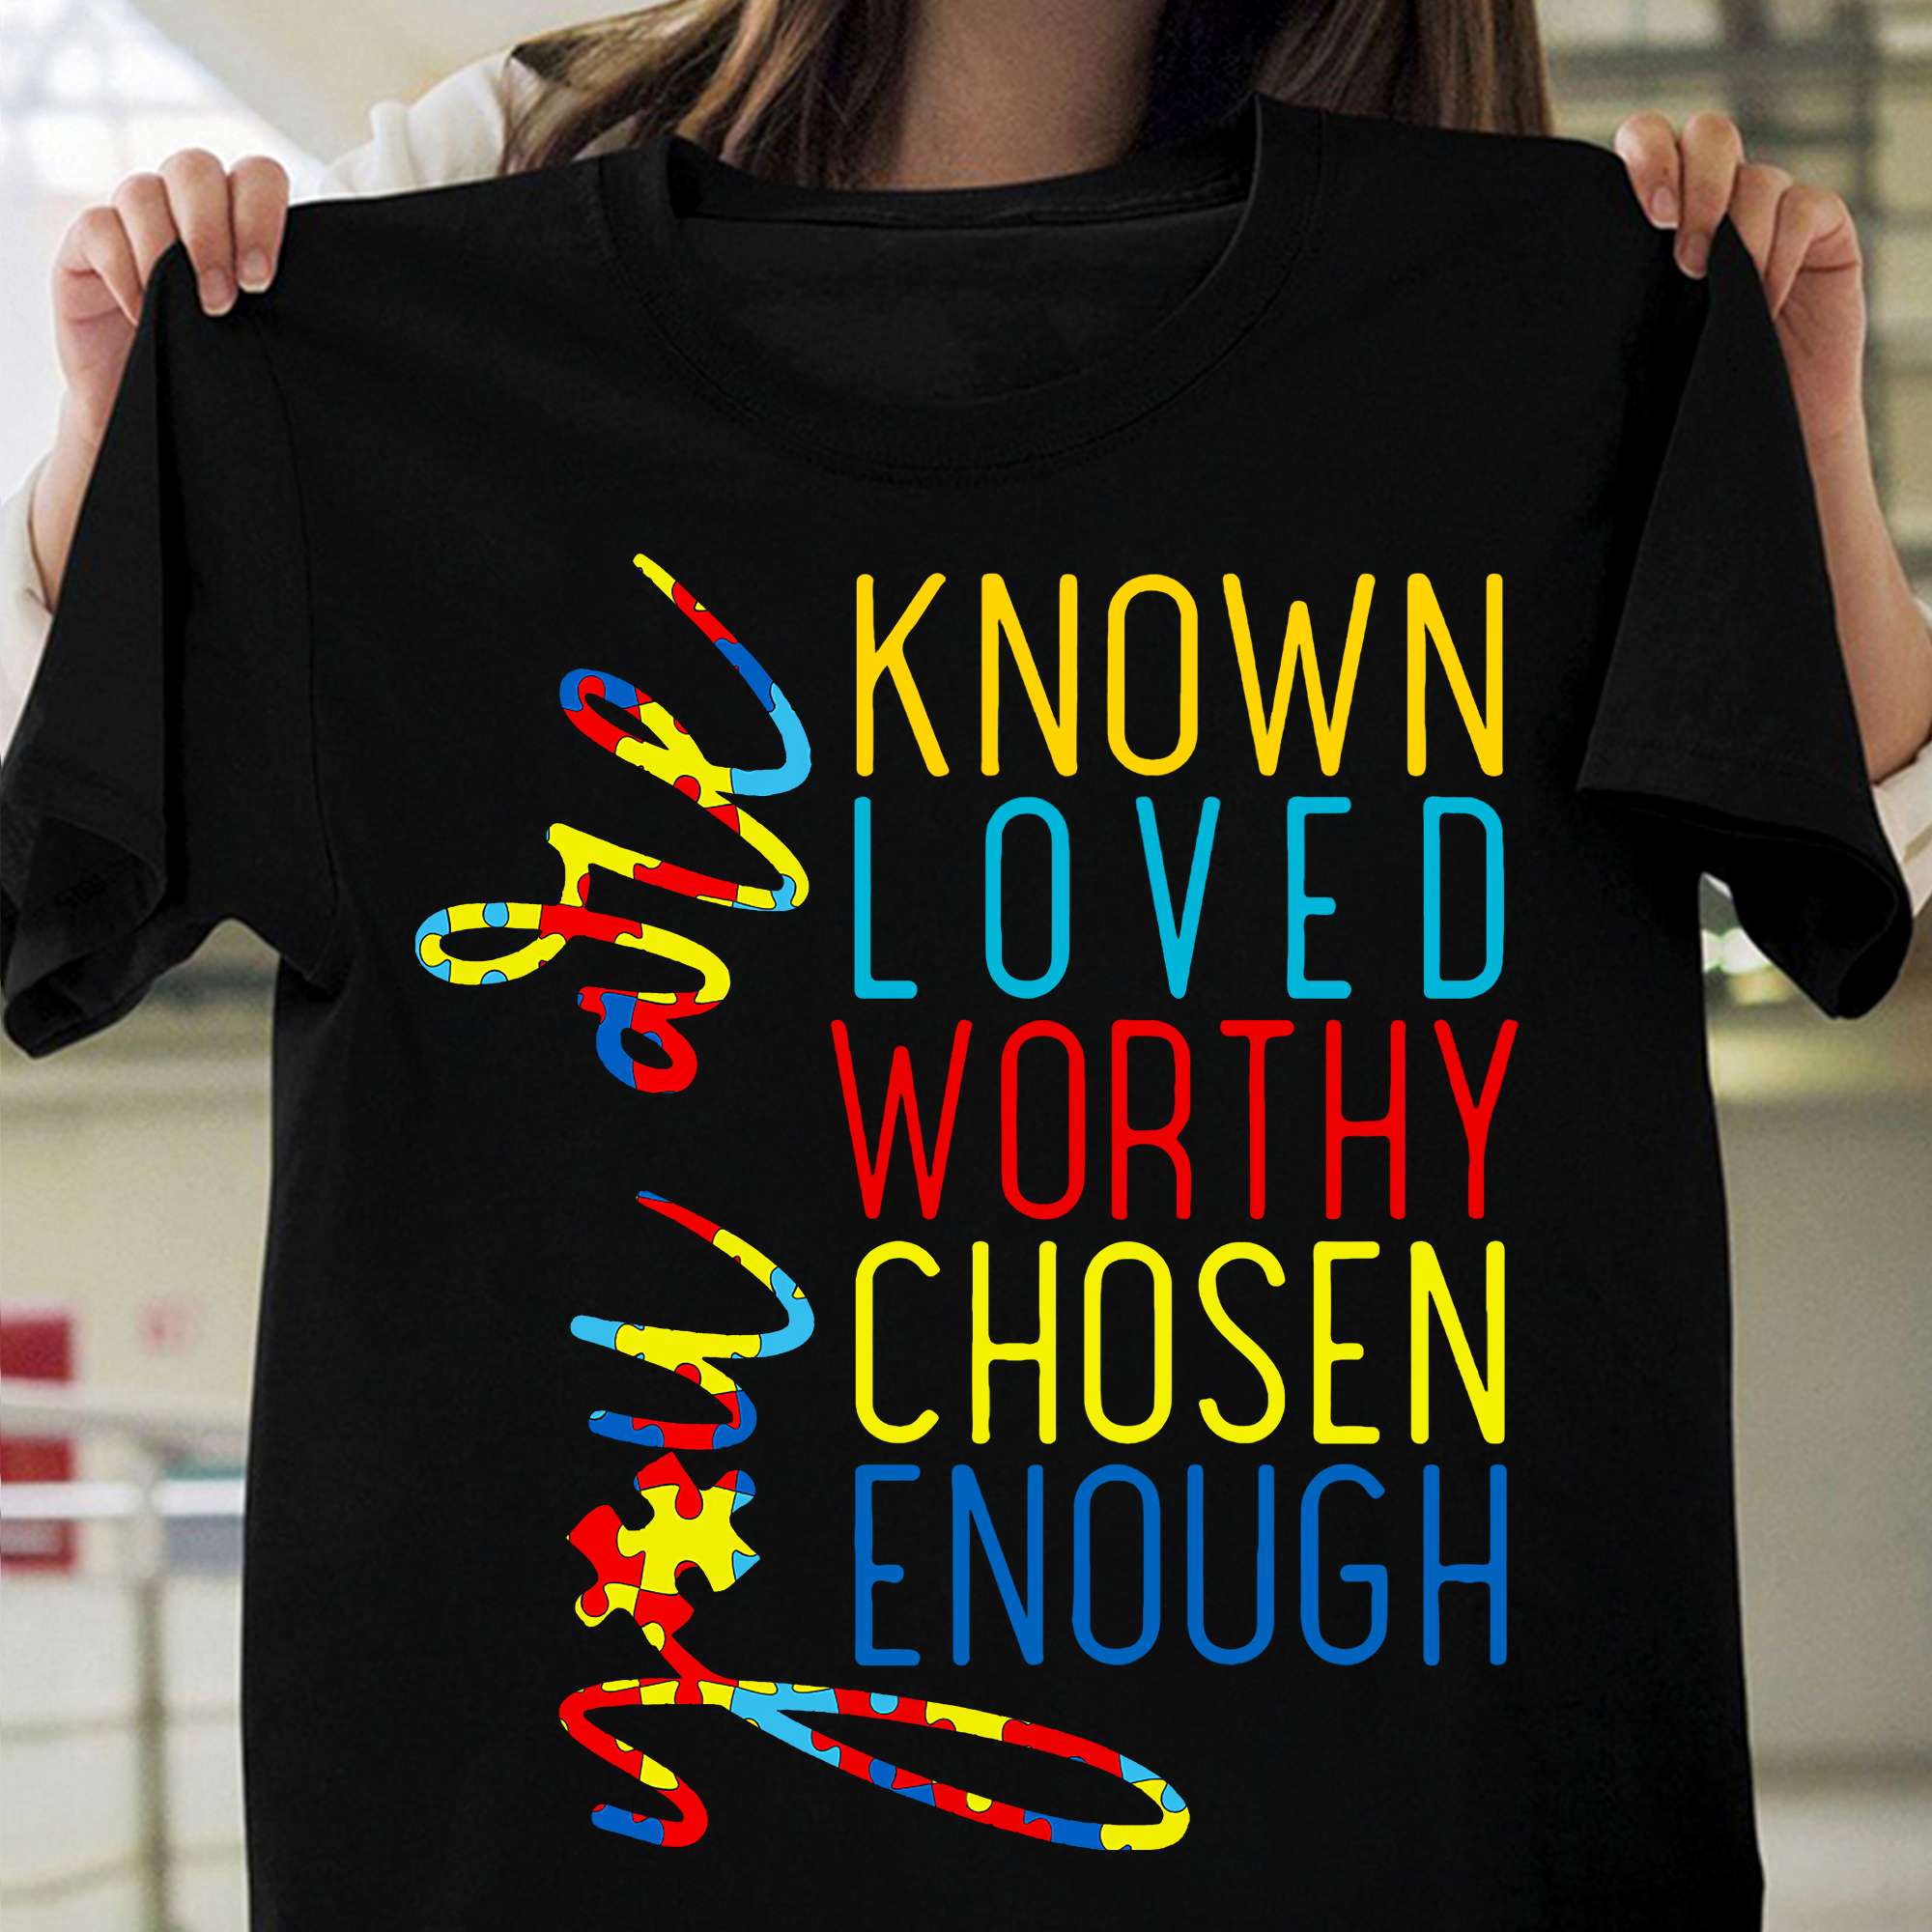 You are known loved worthy chosen enough - Autistic people gift, Autism awareness